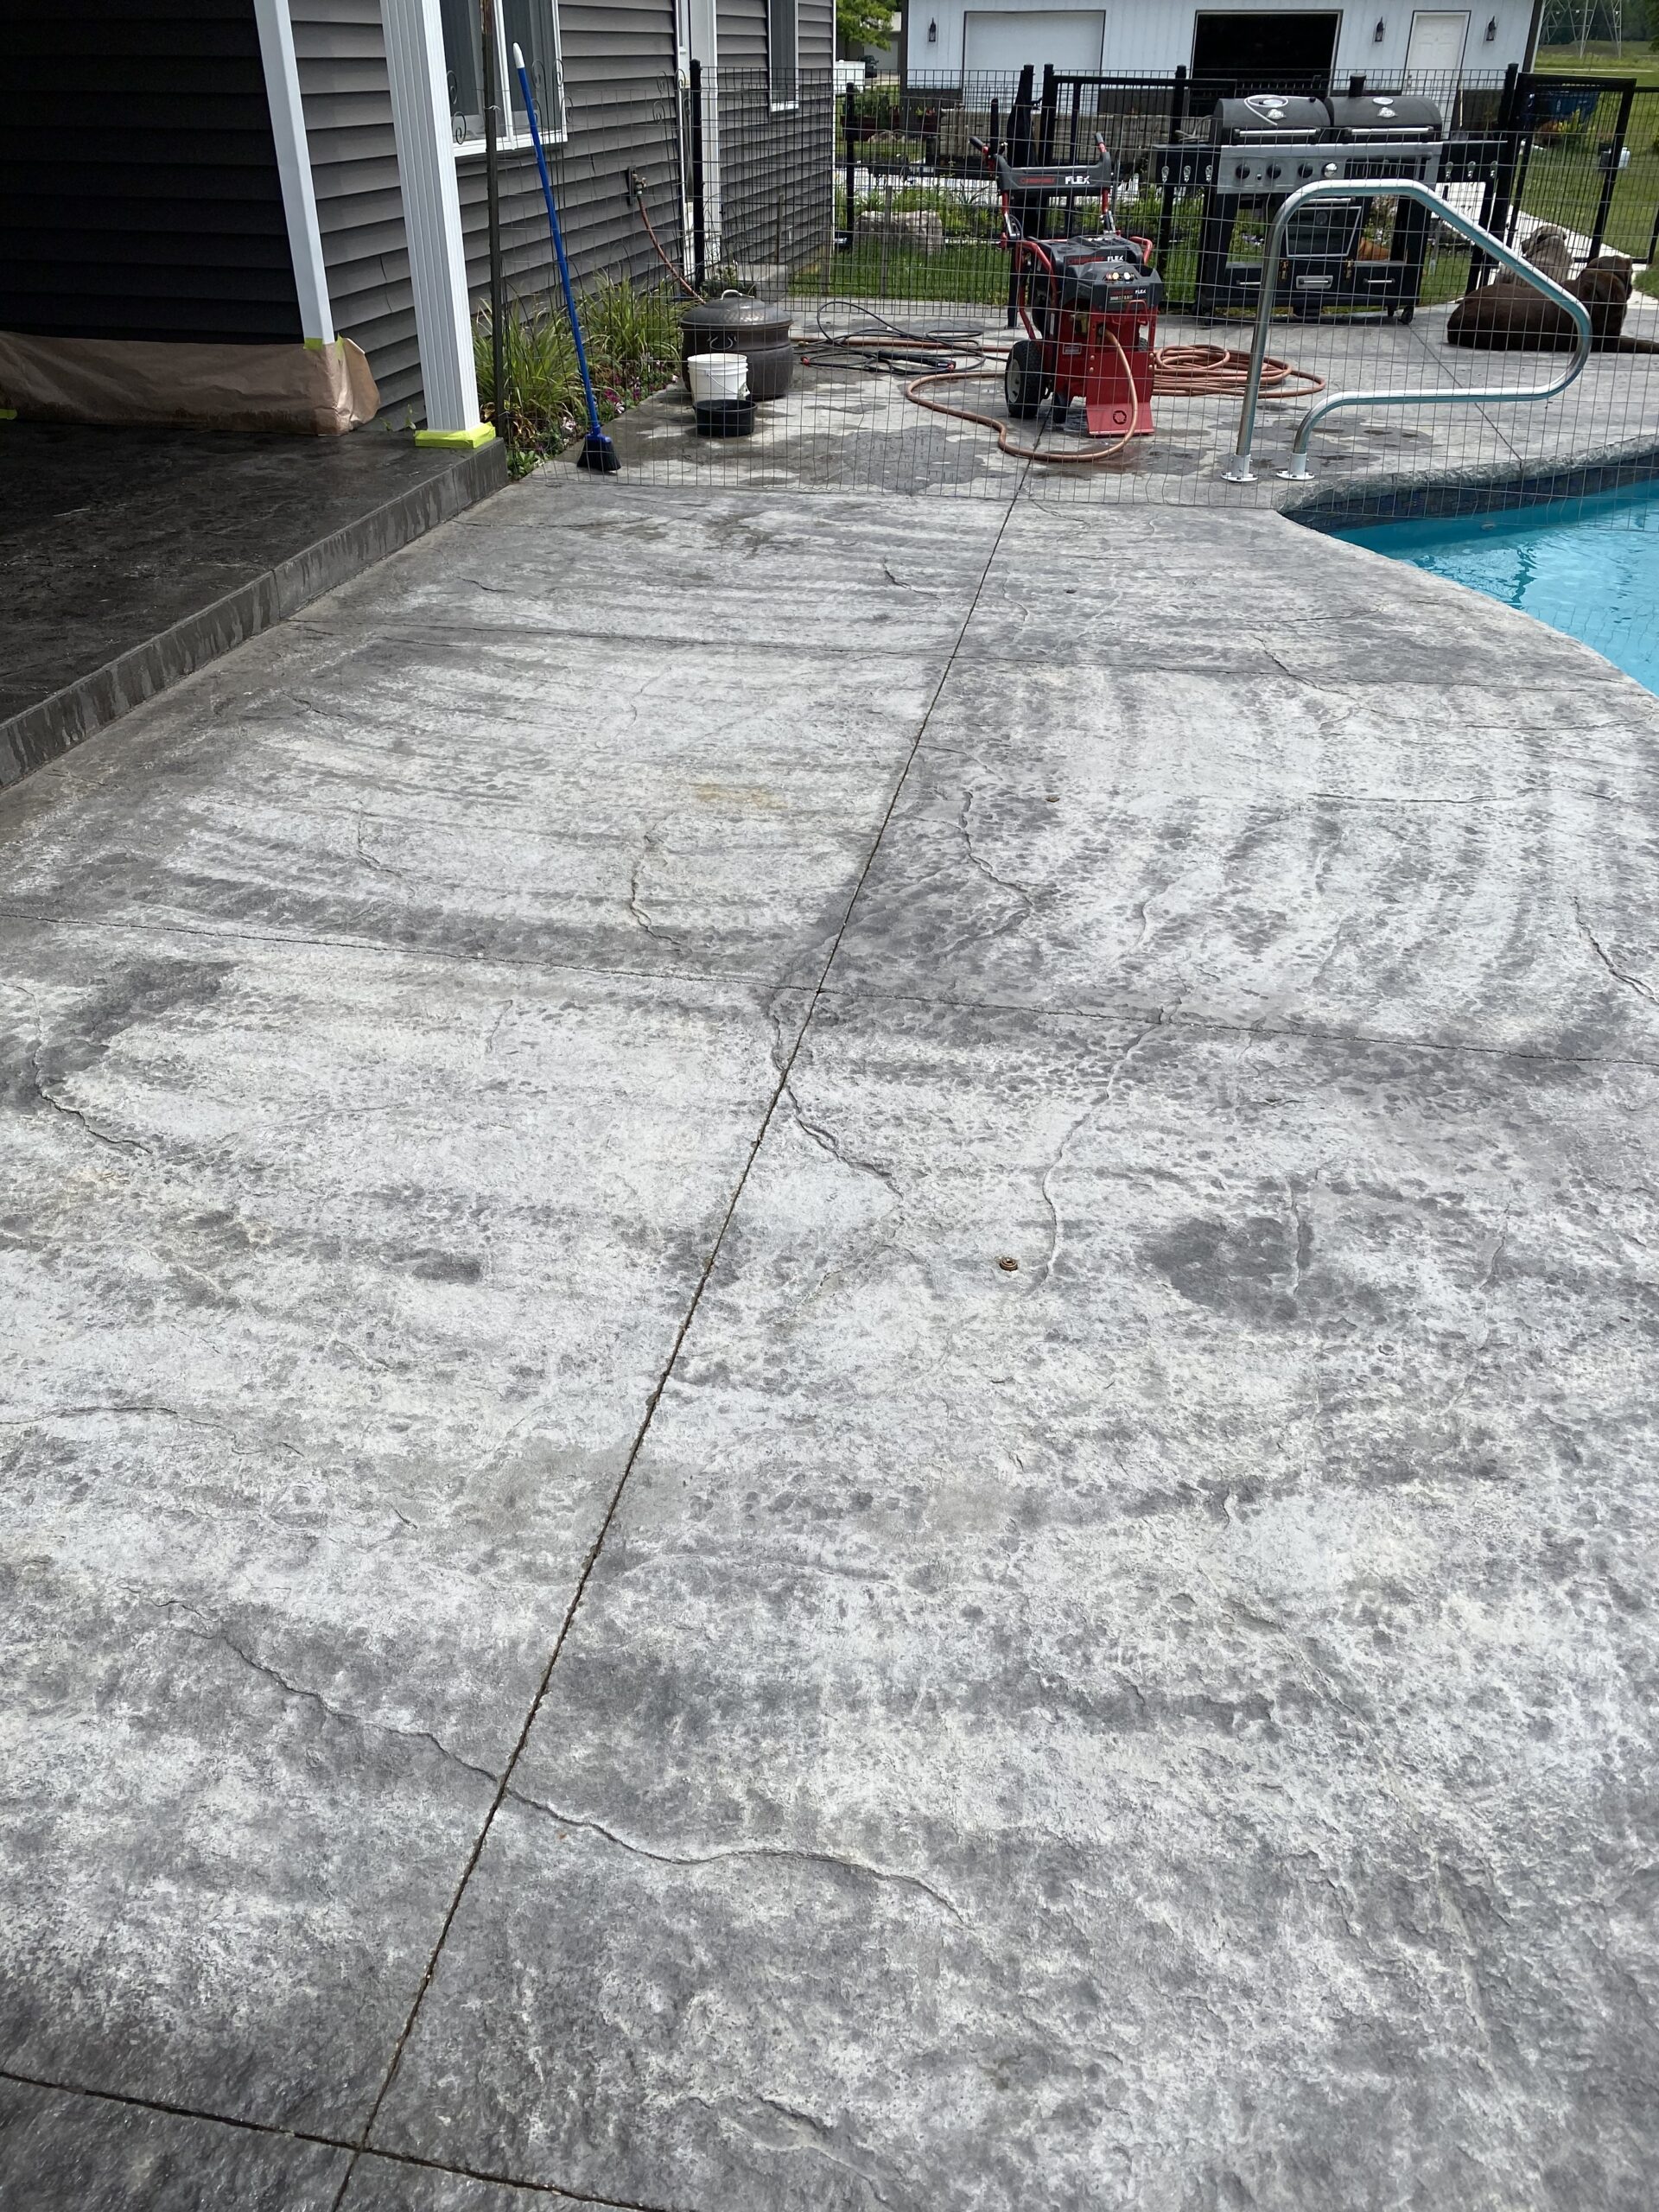 Damaged concrete pool deck stain